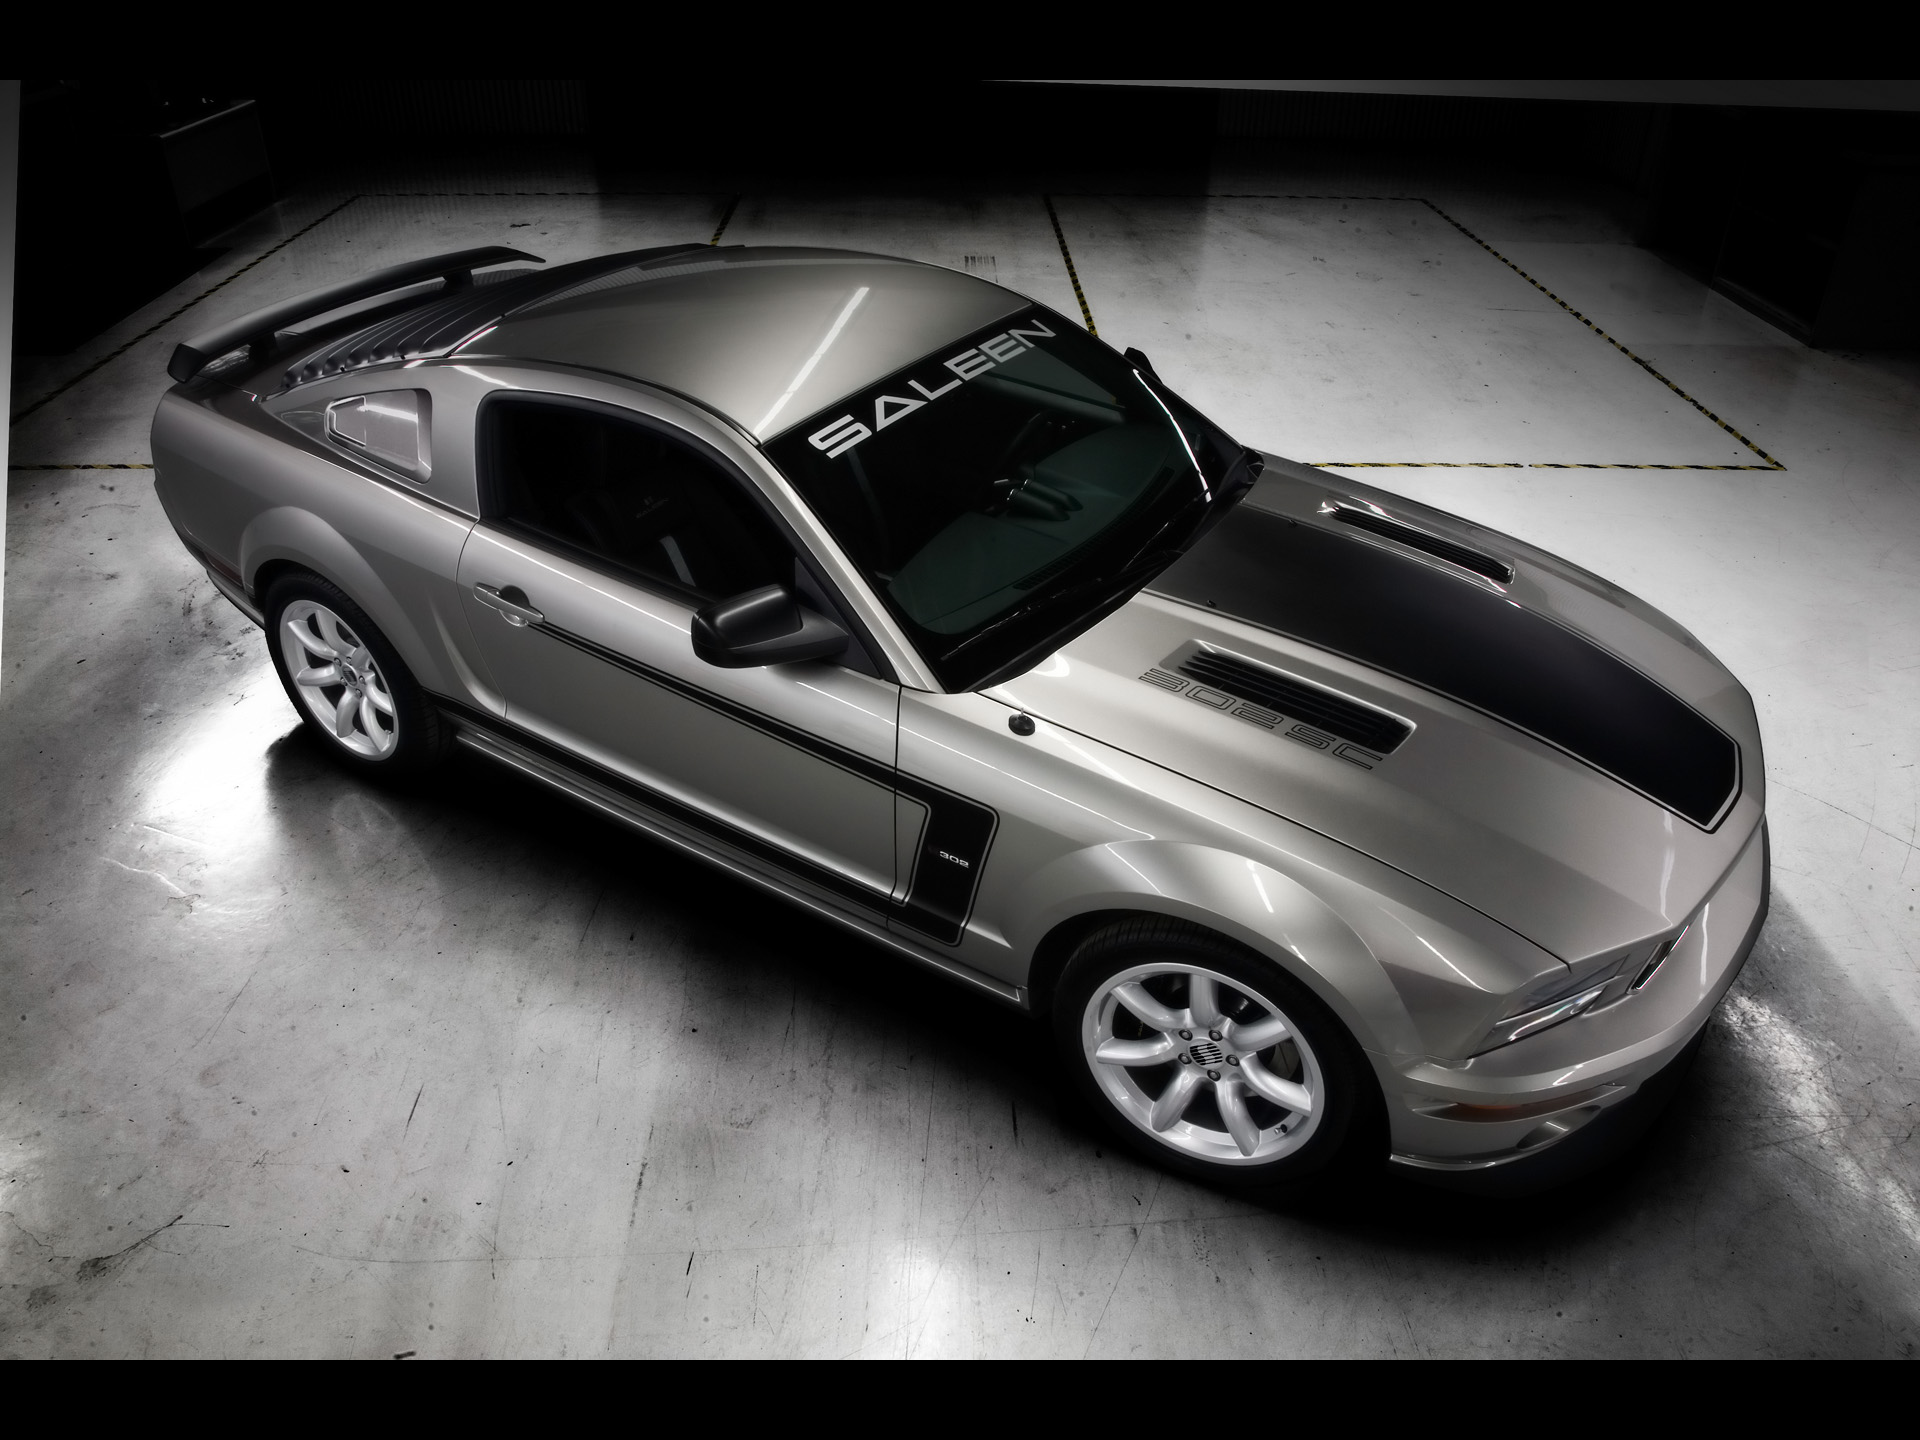 2008, Saleen, H302sc, Ford, Mustang, Muscle, Supercar, Supercars Wallpaper